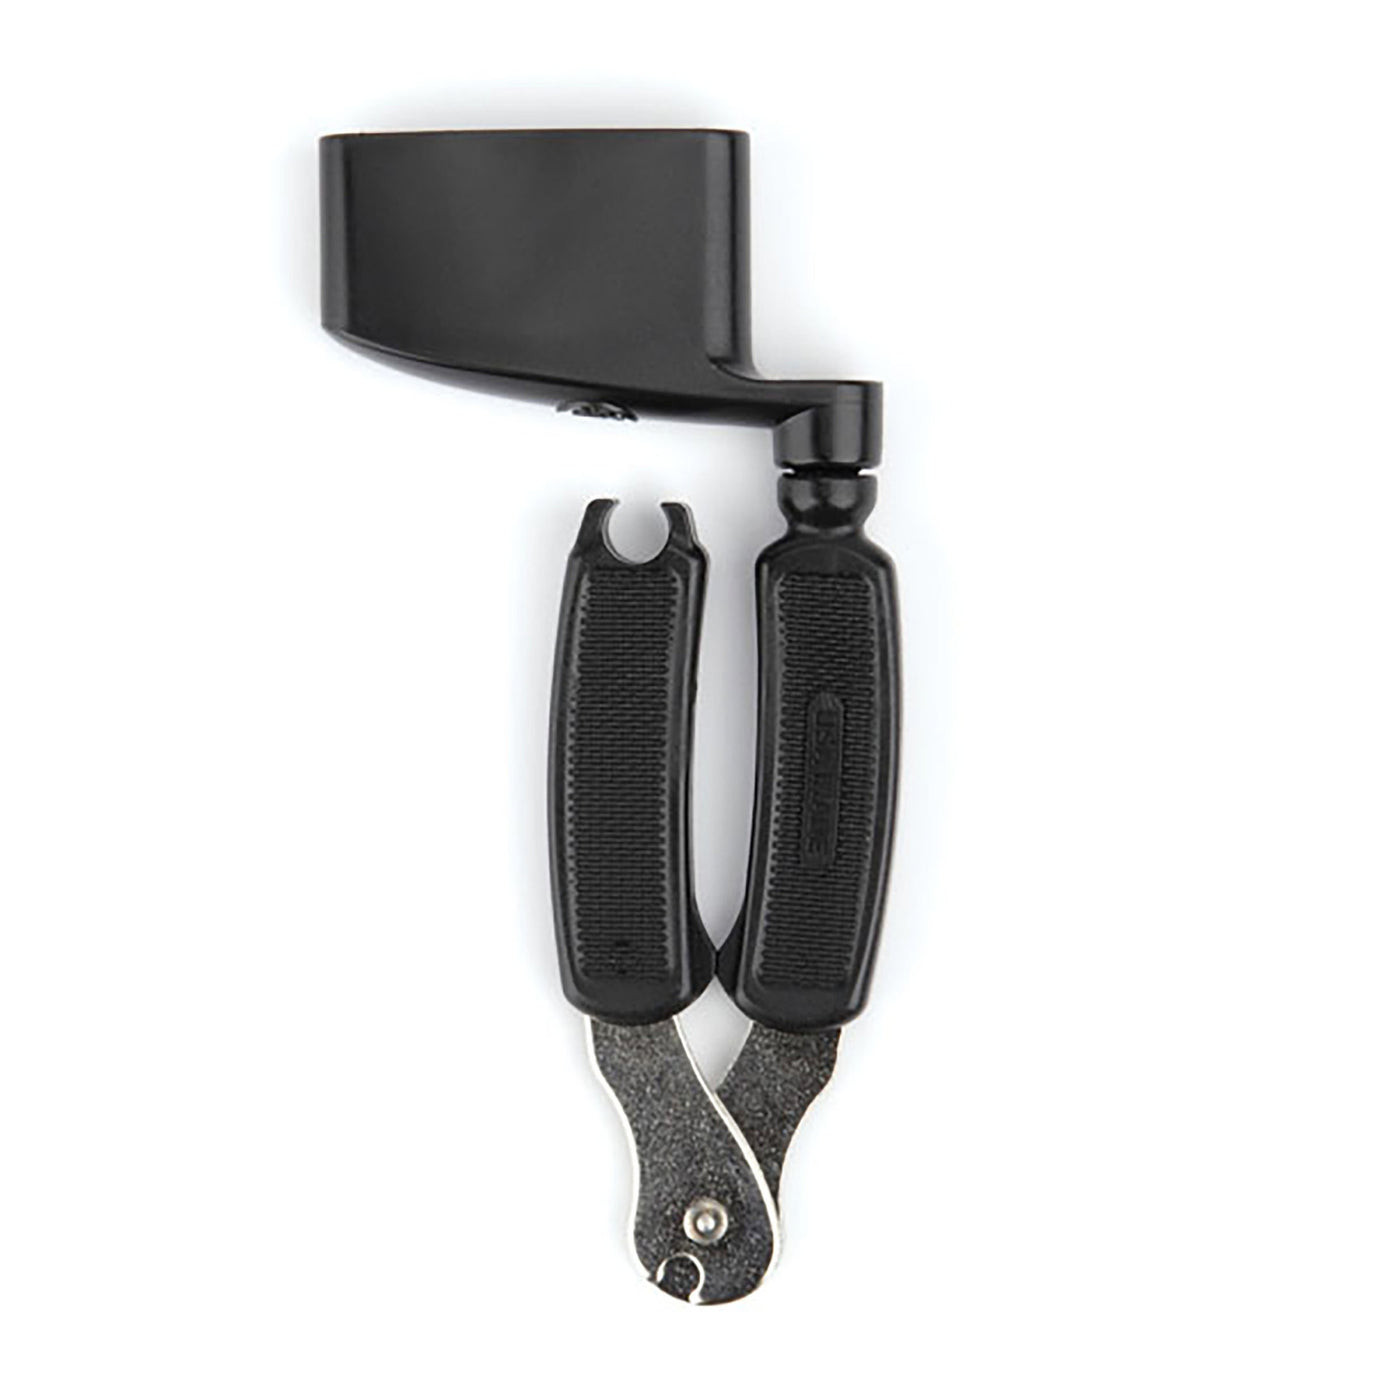 D'Addario Bass Pro-Winder String Winder and Cutter